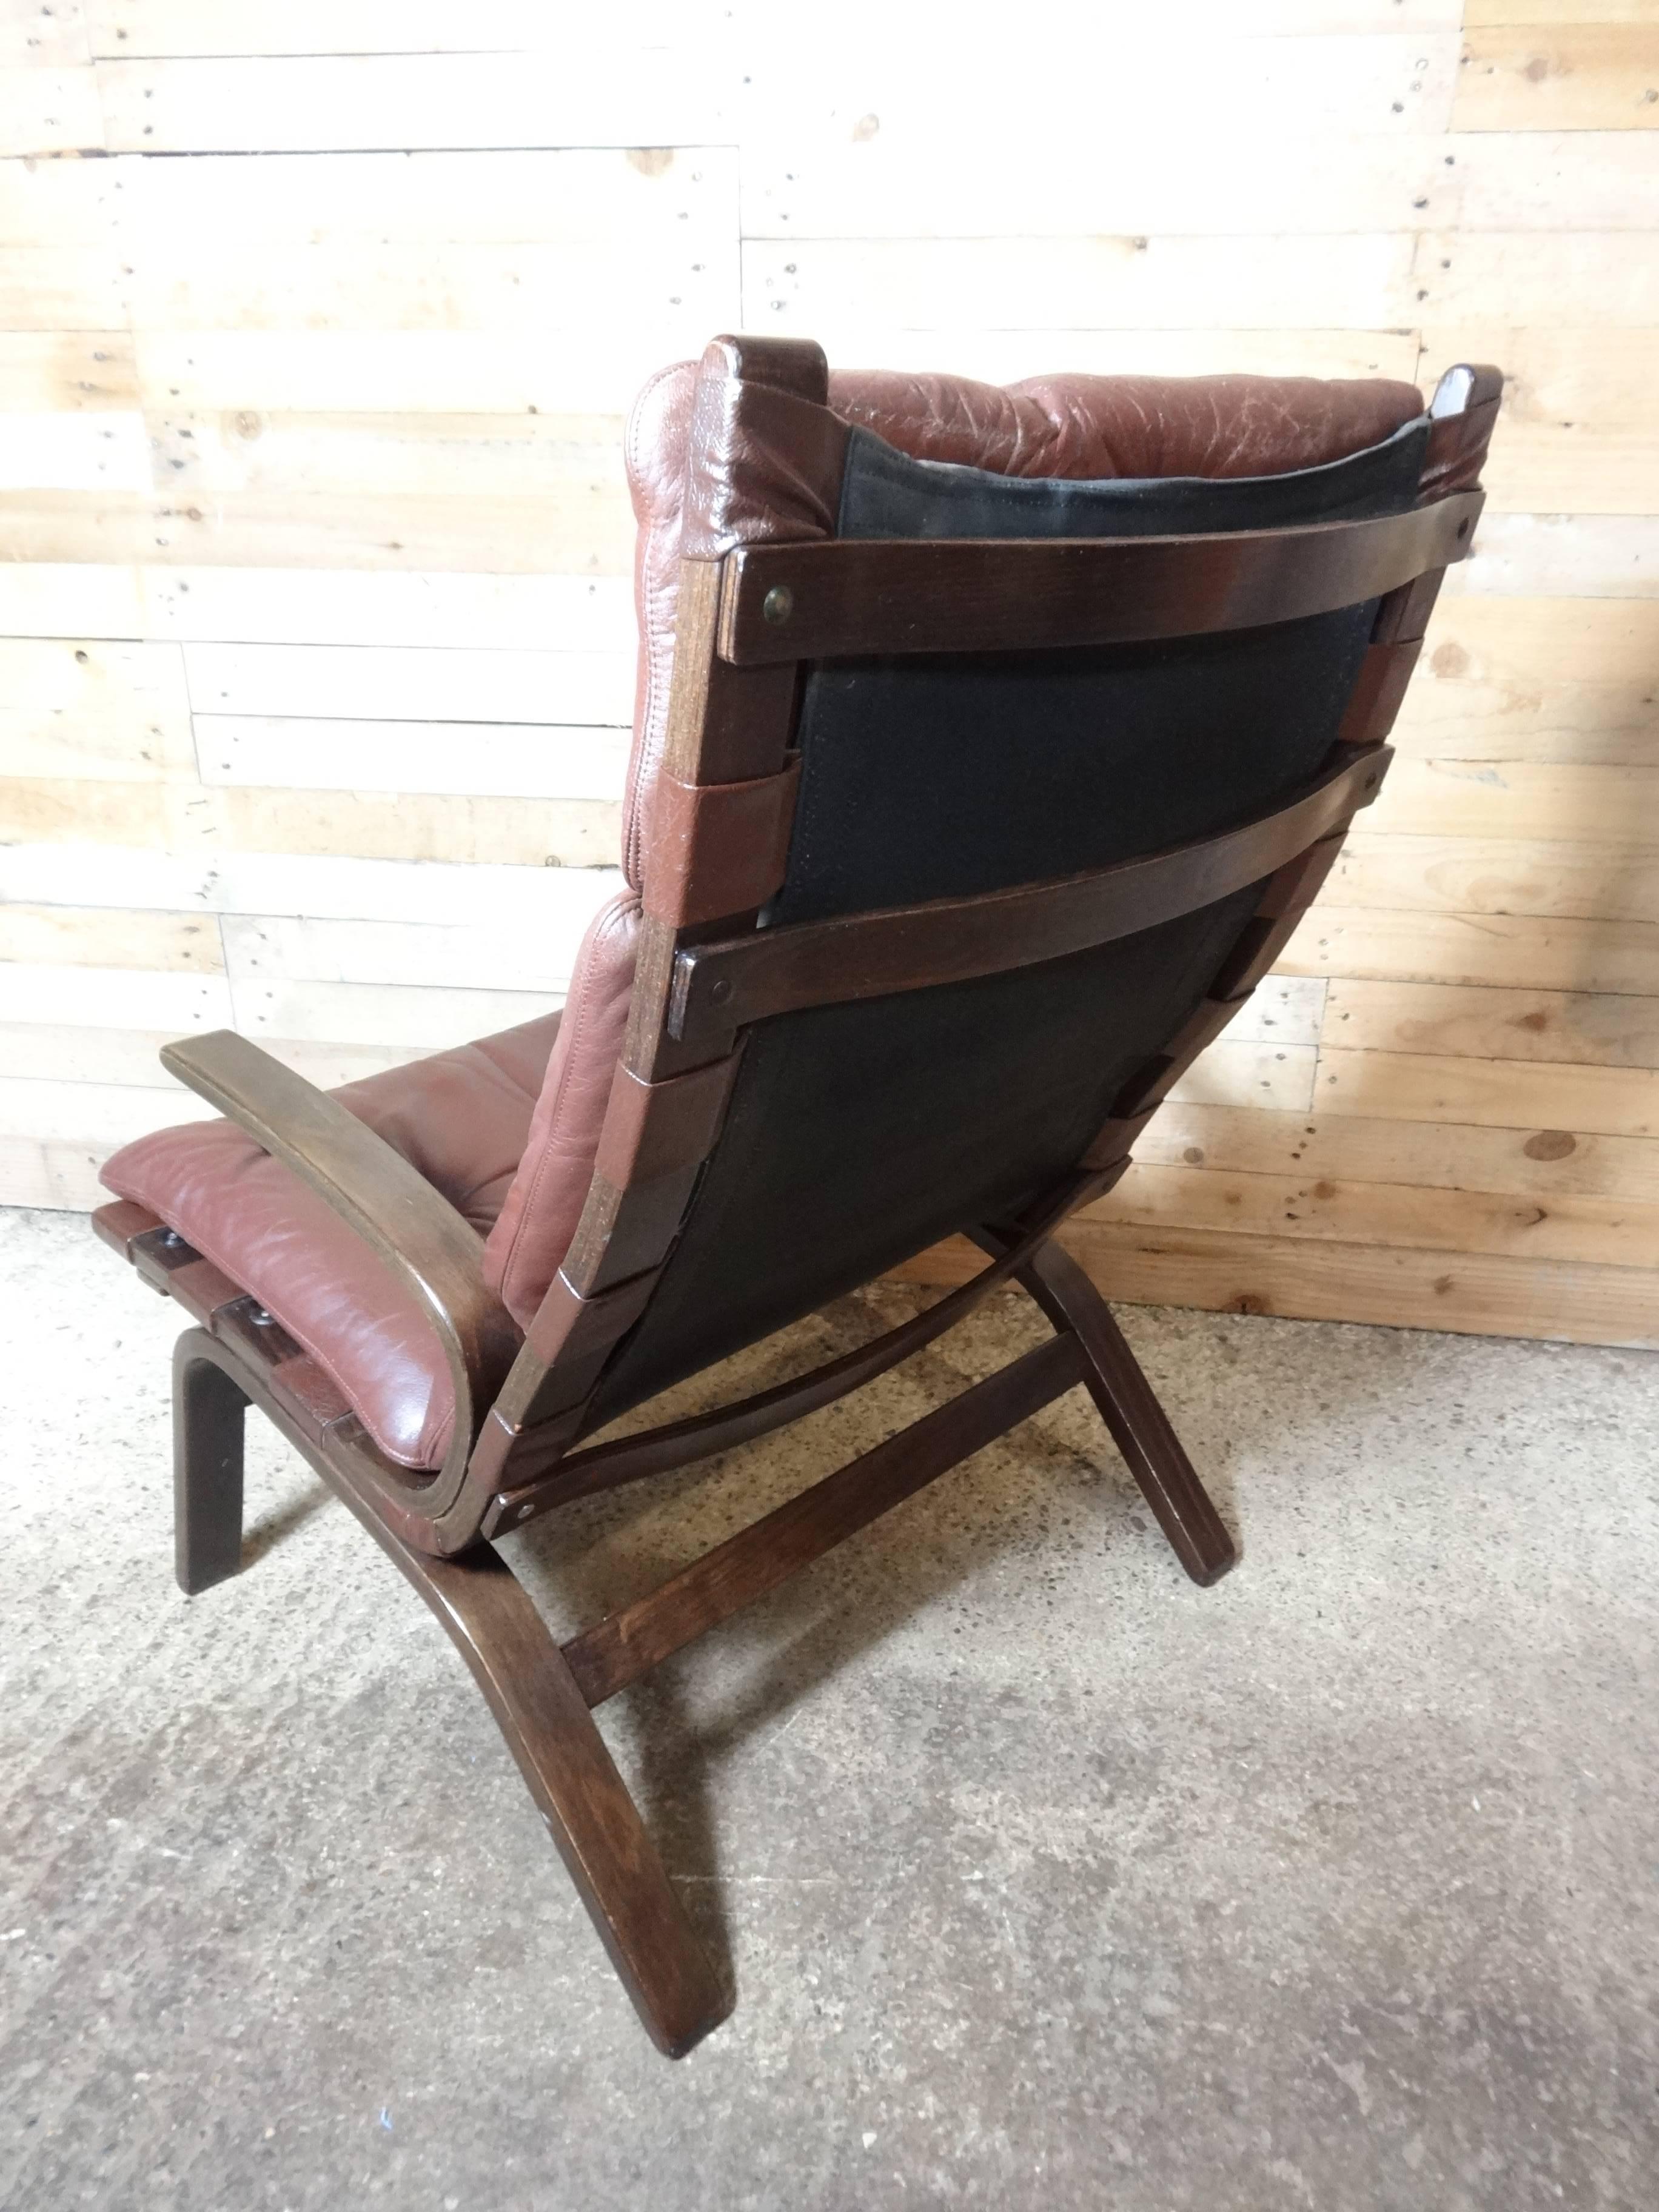 1960 retro vintage original Scandinavian Ingmar Relling designed bentwood  chair covered in a lovely retro leather


Chair dimensions (approximate), seat height 38cm, back height 94cm, depth 80cm, width 64cm.

A beautiful lounge chair, designed by